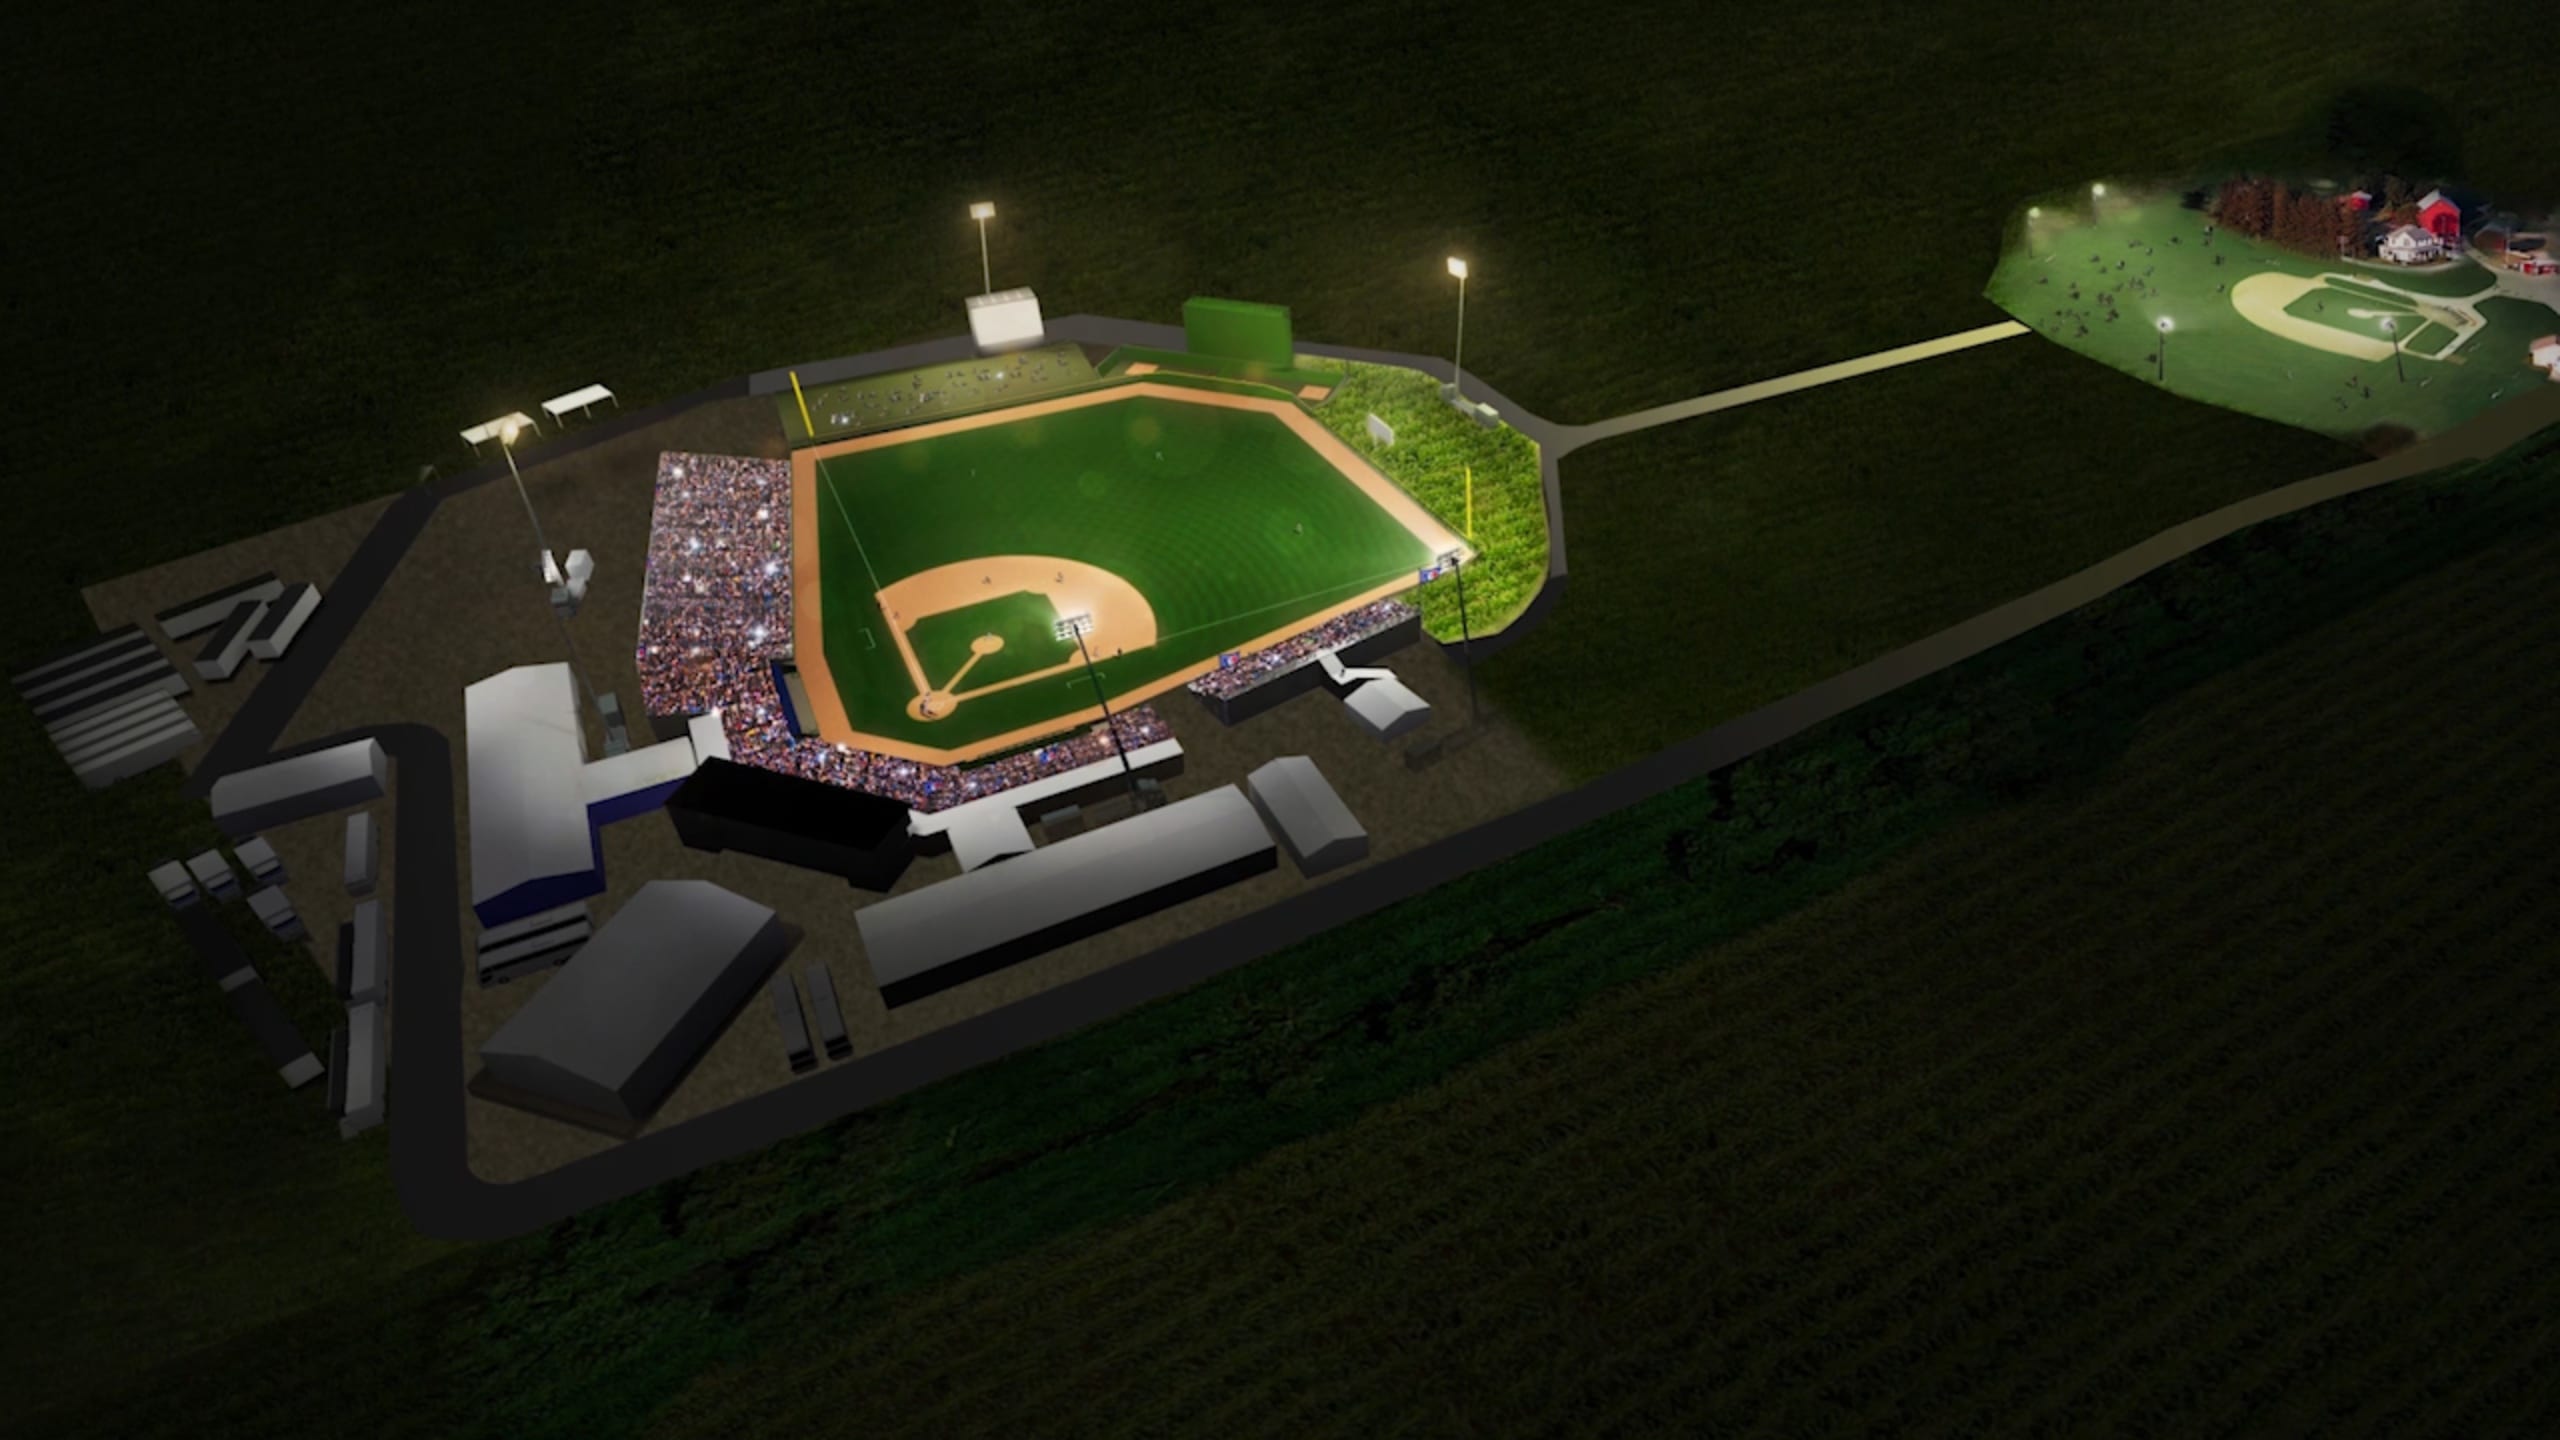 White Sox, Yankees to Play 2020 Game at Field of Dreams Site